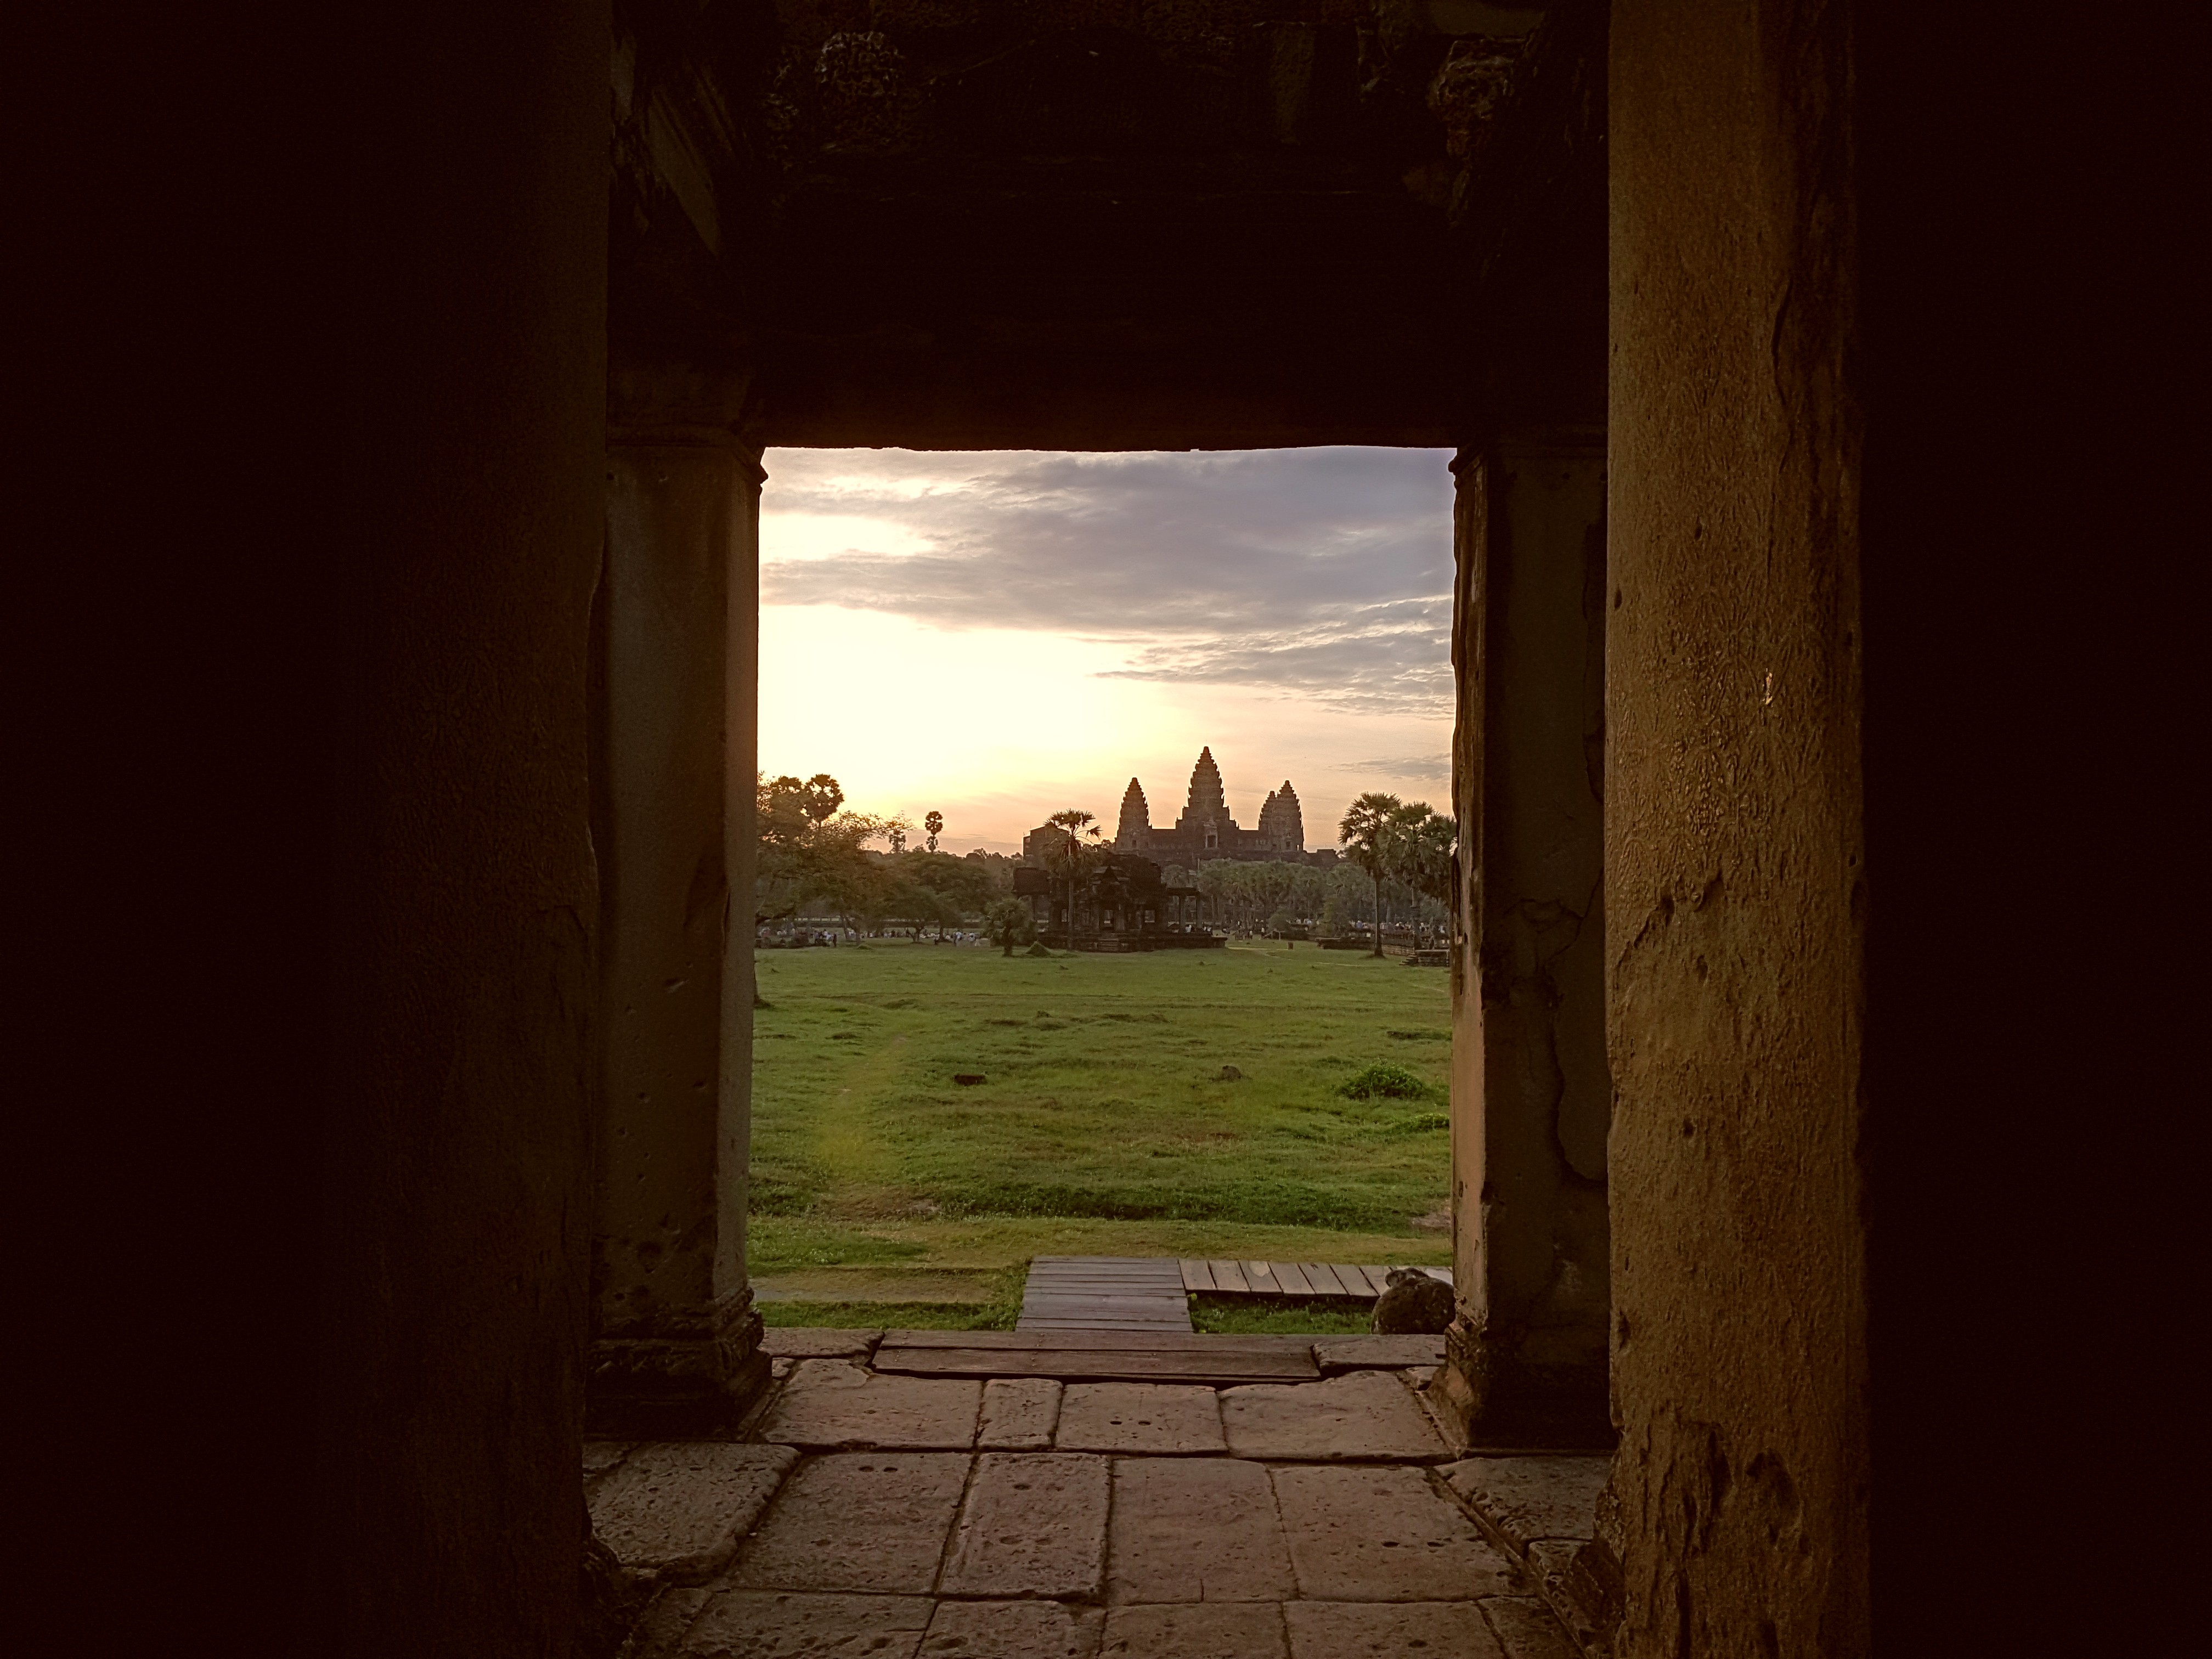 Sunrise at Angkor Wat, a sight not to be missed. Photos: Cedric Tan